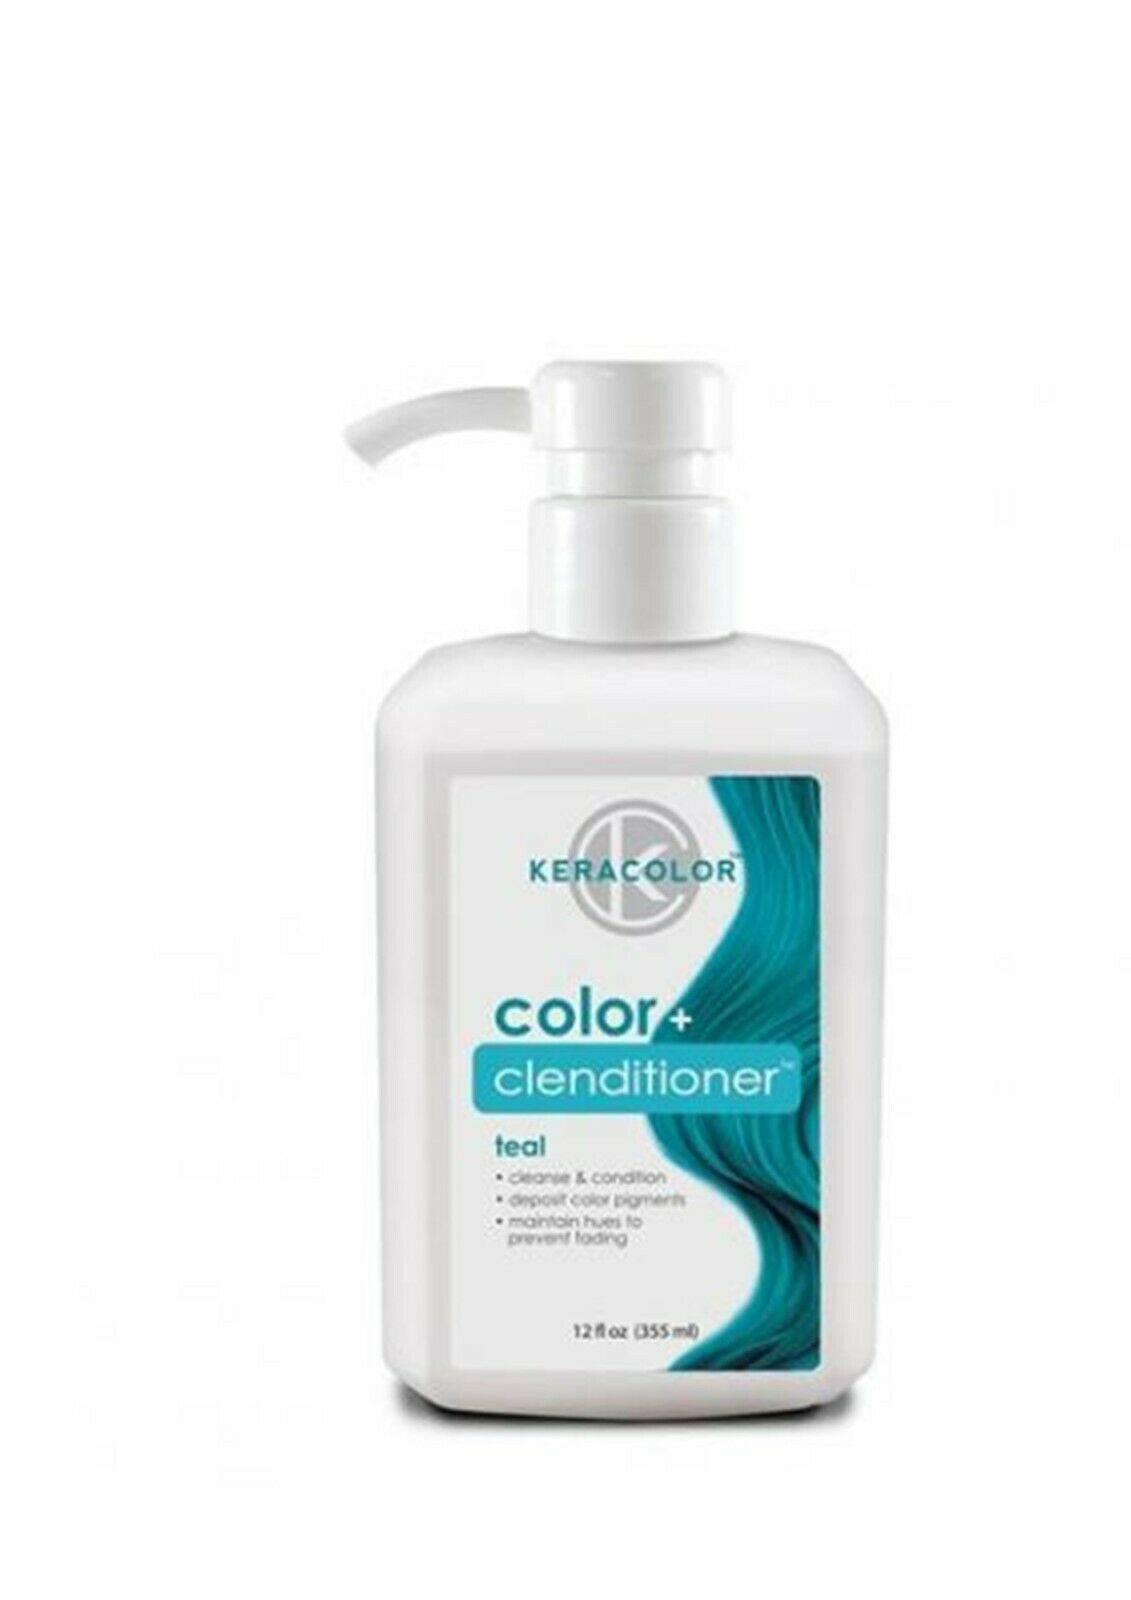 Keracolor Color Clenditioner Colour Shampoo TEAL 355ml Keracolor - On Line Hair Depot